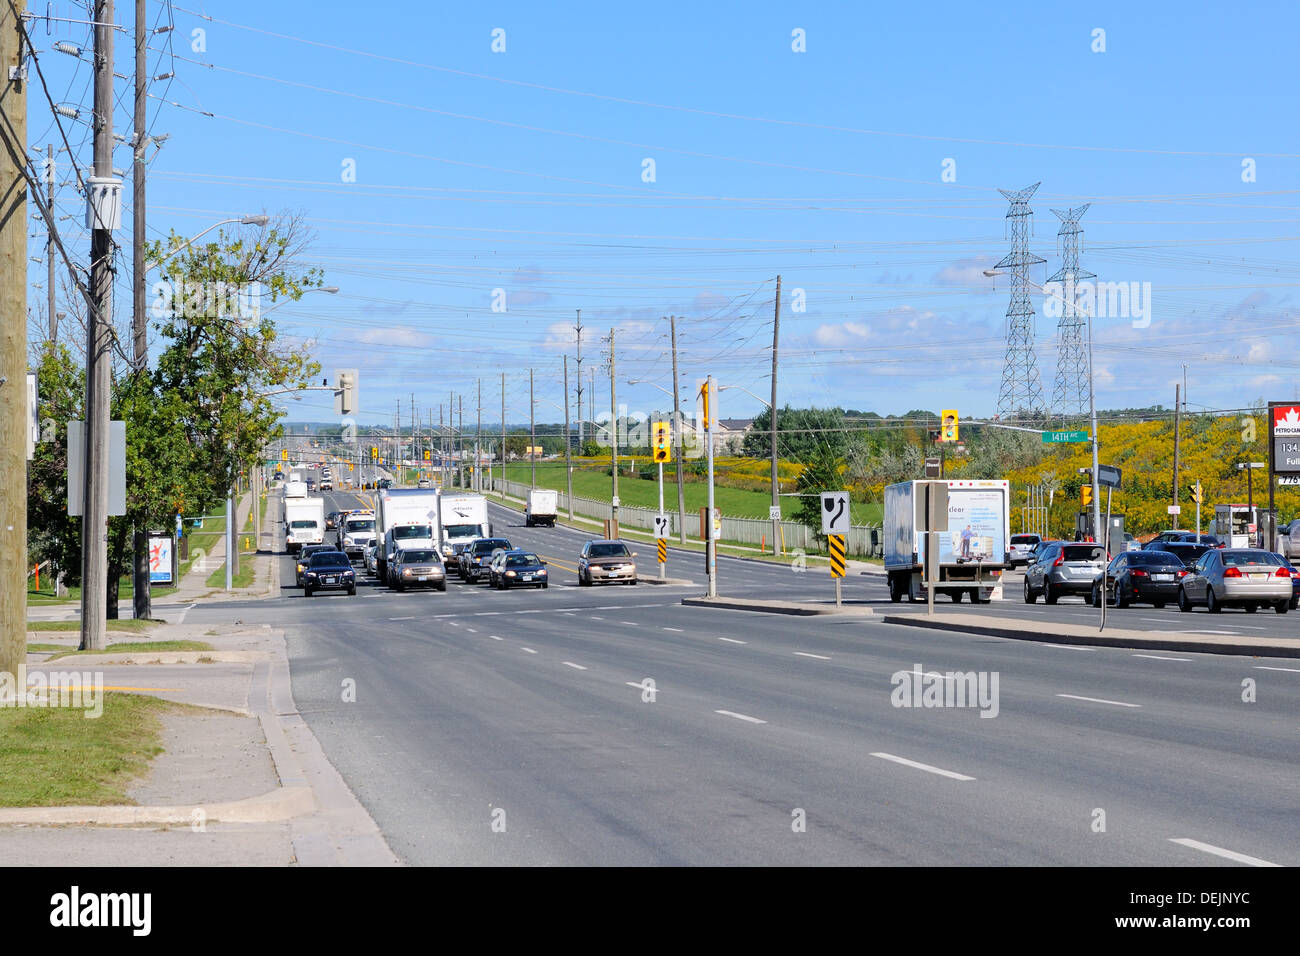 Traffic stopped at an intersection in Toronto, Ontario, Canada Stock Photo